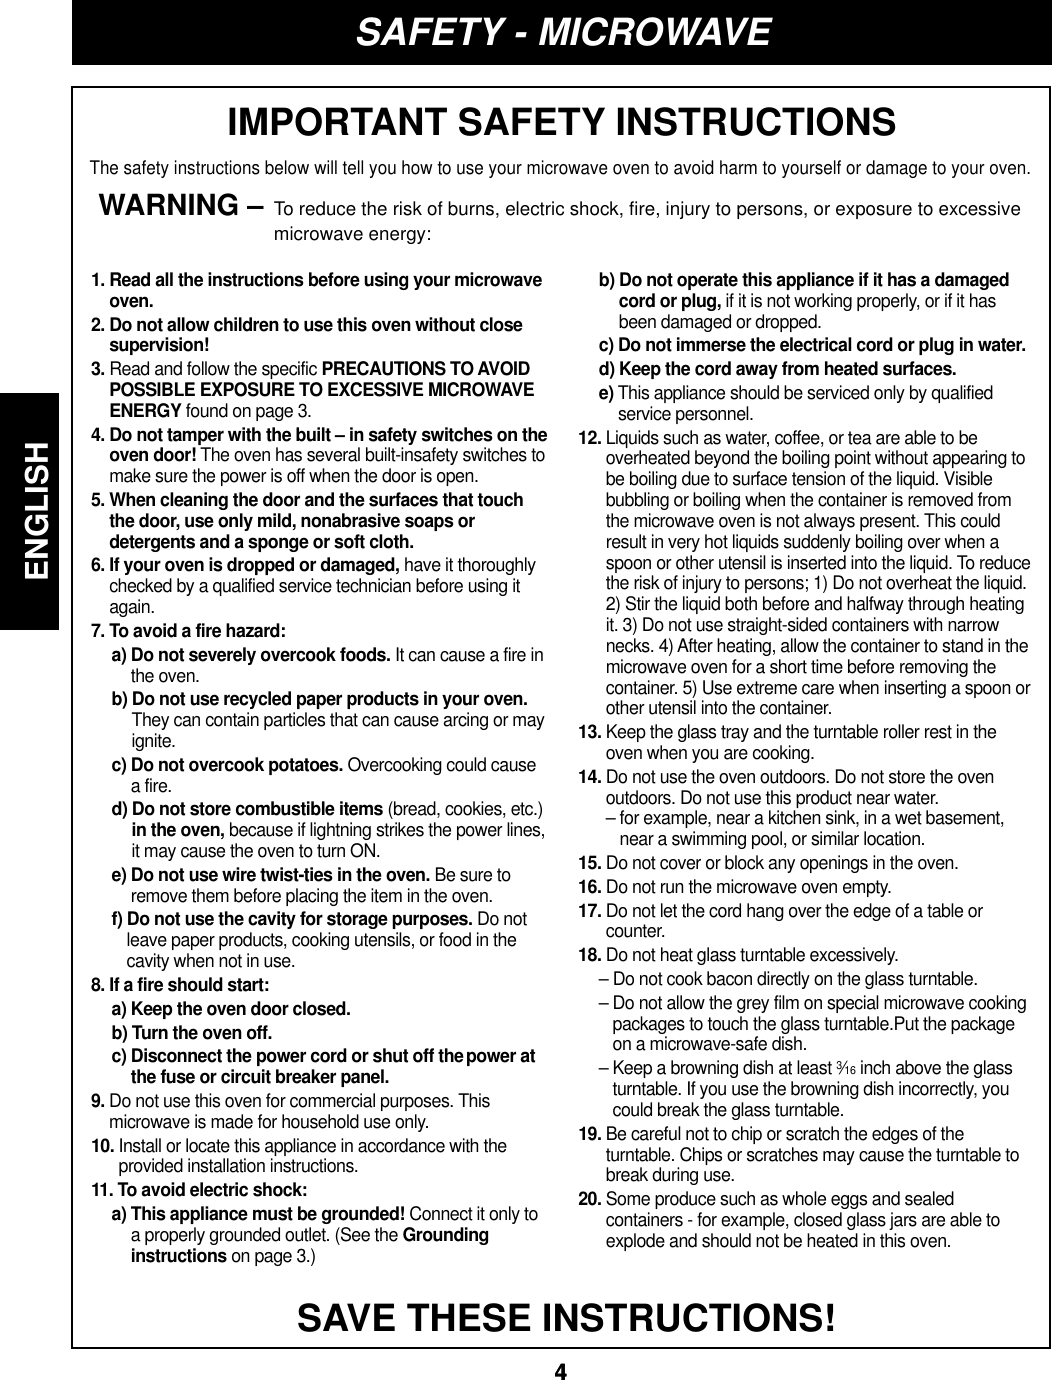 ENGLISH44SAFETY - MICROWAVEIMPORTANT SAFETY INSTRUCTIONSThe safety instructions below will tell you how to use your microwave oven to avoid harm to yourself or damage to your oven.WARNING – To reduce the risk of burns, electric shock, fire, injury to persons, or exposure to excessivemicrowave energy:SAVE THESE INSTRUCTIONS!1. Read all the instructions before using your microwaveoven.2. Do not allow children to use this oven without closesupervision!3. Read and follow the specific PRECAUTIONS TO AVOIDPOSSIBLE EXPOSURE TO EXCESSIVE MICROWAVEENERGY found on page 3.4. Do not tamper with the built – in safety switches on theoven door! The oven has several built-insafety switches tomake sure the power is off when the door is open.5. When cleaning the door and the surfaces that touchthe door, use only mild, nonabrasive soaps ordetergents and a sponge or soft cloth.6. If your oven is dropped or damaged, have it thoroughlychecked by a qualified service technician before using itagain.7. To avoid a fire hazard:a) Do not severely overcook foods. It can cause a fire inthe oven.b) Do not use recycled paper products in your oven.They can contain particles that can cause arcing or mayignite.c) Do not overcook potatoes. Overcooking could causea fire.d) Do not store combustible items (bread, cookies, etc.)in the oven, because if lightning strikes the power lines,it may cause the oven to turn ON.e) Do not use wire twist-ties in the oven. Be sure toremove them before placing the item in the oven.f) Do not use the cavity for storage purposes. Do notleave paper products, cooking utensils, or food in thecavity when not in use.8. If a fire should start:a) Keep the oven door closed.b) Turn the oven off.c) Disconnect the power cord or shut off thepower atthe fuse or circuit breaker panel.9. Do not use this oven for commercial purposes. Thismicrowave is made for household use only.10. Install or locate this appliance in accordance with theprovided installation instructions.11. To avoid electric shock:a) This appliance must be grounded! Connect it only toa properly grounded outlet. (See the Groundinginstructions on page 3.)b) Do not operate this appliance if it has a damagedcord or plug, if it is not working properly, or if it hasbeen damaged or dropped.c) Do not immerse the electrical cord or plug in water.d) Keep the cord away from heated surfaces.e) This appliance should be serviced only by qualifiedservice personnel.12. Liquids such as water, coffee, or tea are able to beoverheated beyond the boiling point without appearing tobe boiling due to surface tension of the liquid. Visiblebubbling or boiling when the container is removed fromthe microwave oven is not always present. This couldresult in very hot liquids suddenly boiling over when aspoon or other utensil is inserted into the liquid. To reducethe risk of injury to persons; 1) Do not overheat the liquid.2) Stir the liquid both before and halfway through heatingit. 3) Do not use straight-sided containers with narrownecks. 4) After heating, allow the container to stand in themicrowave oven for a short time before removing thecontainer. 5) Use extreme care when inserting a spoon orother utensil into the container.13. Keep the glass tray and the turntable roller rest in theoven when you are cooking.14. Do not use the oven outdoors. Do not store the ovenoutdoors. Do not use this product near water.– for example, near a kitchen sink, in a wet basement,near a swimming pool, or similar location.15. Do not cover or block any openings in the oven.16. Do not run the microwave oven empty.17. Do not let the cord hang over the edge of a table orcounter.18. Do not heat glass turntable excessively.– Do not cook bacon directly on the glass turntable.– Do not allow the grey film on special microwave cookingpackages to touch the glass turntable.Put the packageon a microwave-safe dish.– Keep a browning dish at least 3⁄16 inch above the glassturntable. If you use the browning dish incorrectly, youcould break the glass turntable.19. Be careful not to chip or scratch the edges of theturntable. Chips or scratches may cause the turntable tobreak during use.20. Some produce such as whole eggs and sealedcontainers - for example, closed glass jars are able toexplode and should not be heated in this oven.